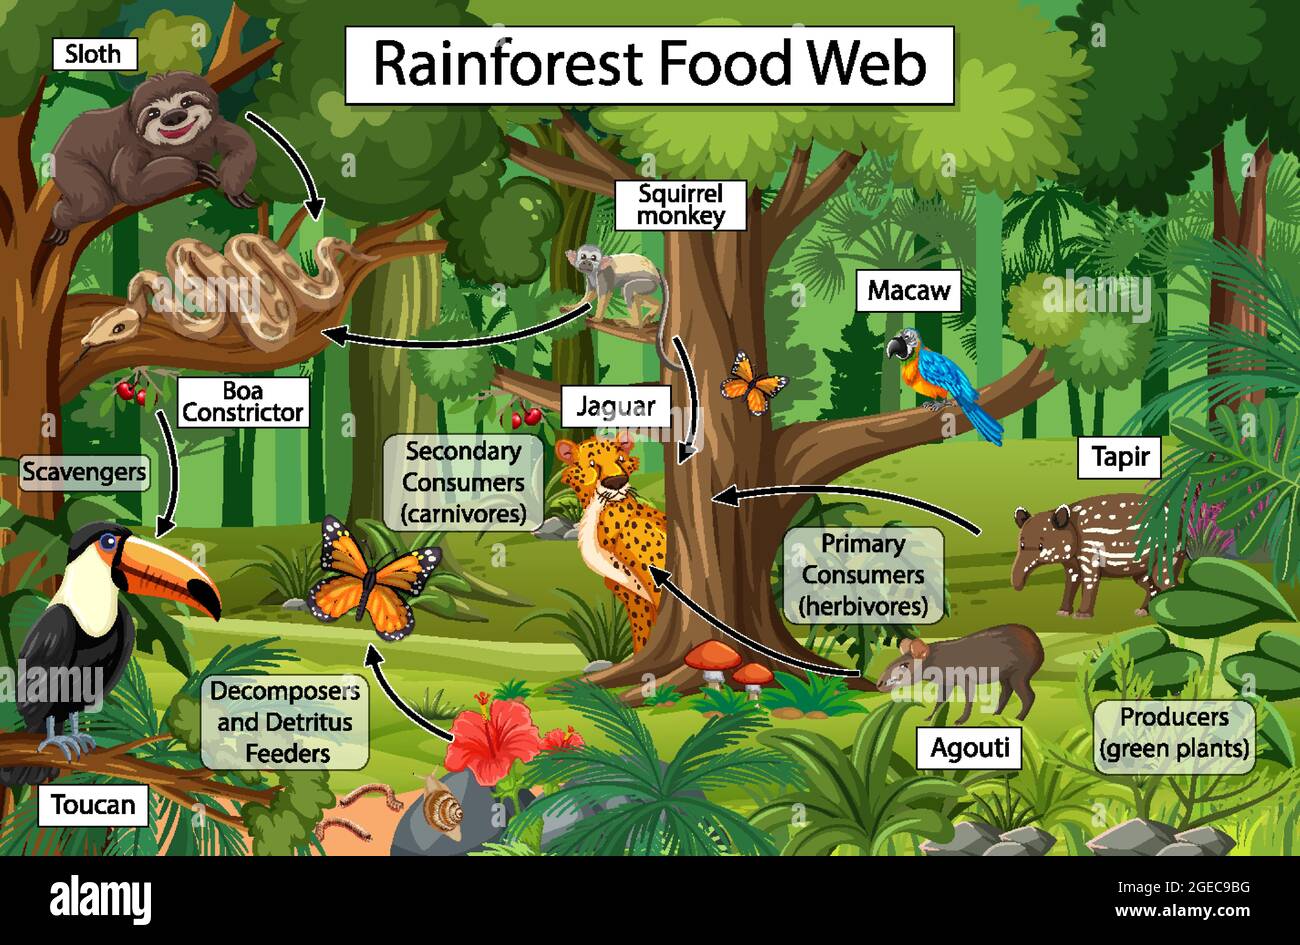 Diagram Showing Food Web In The Rainforest Illustration Stock Vector Image Art Alamy